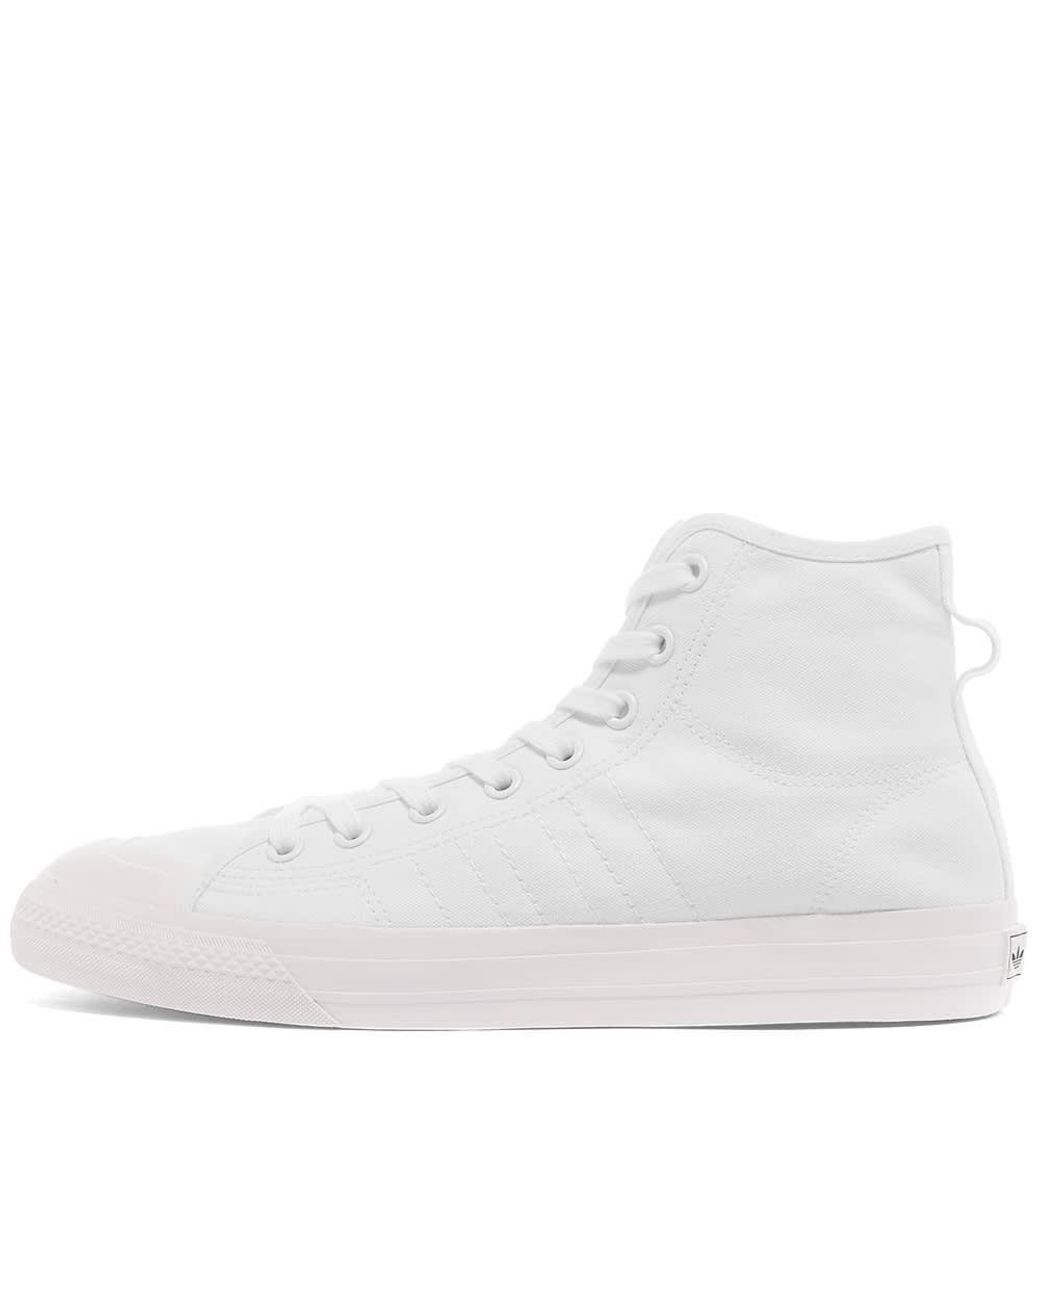 adidas Nizza Rf Hi Top Trainers in White for Men | Lyst